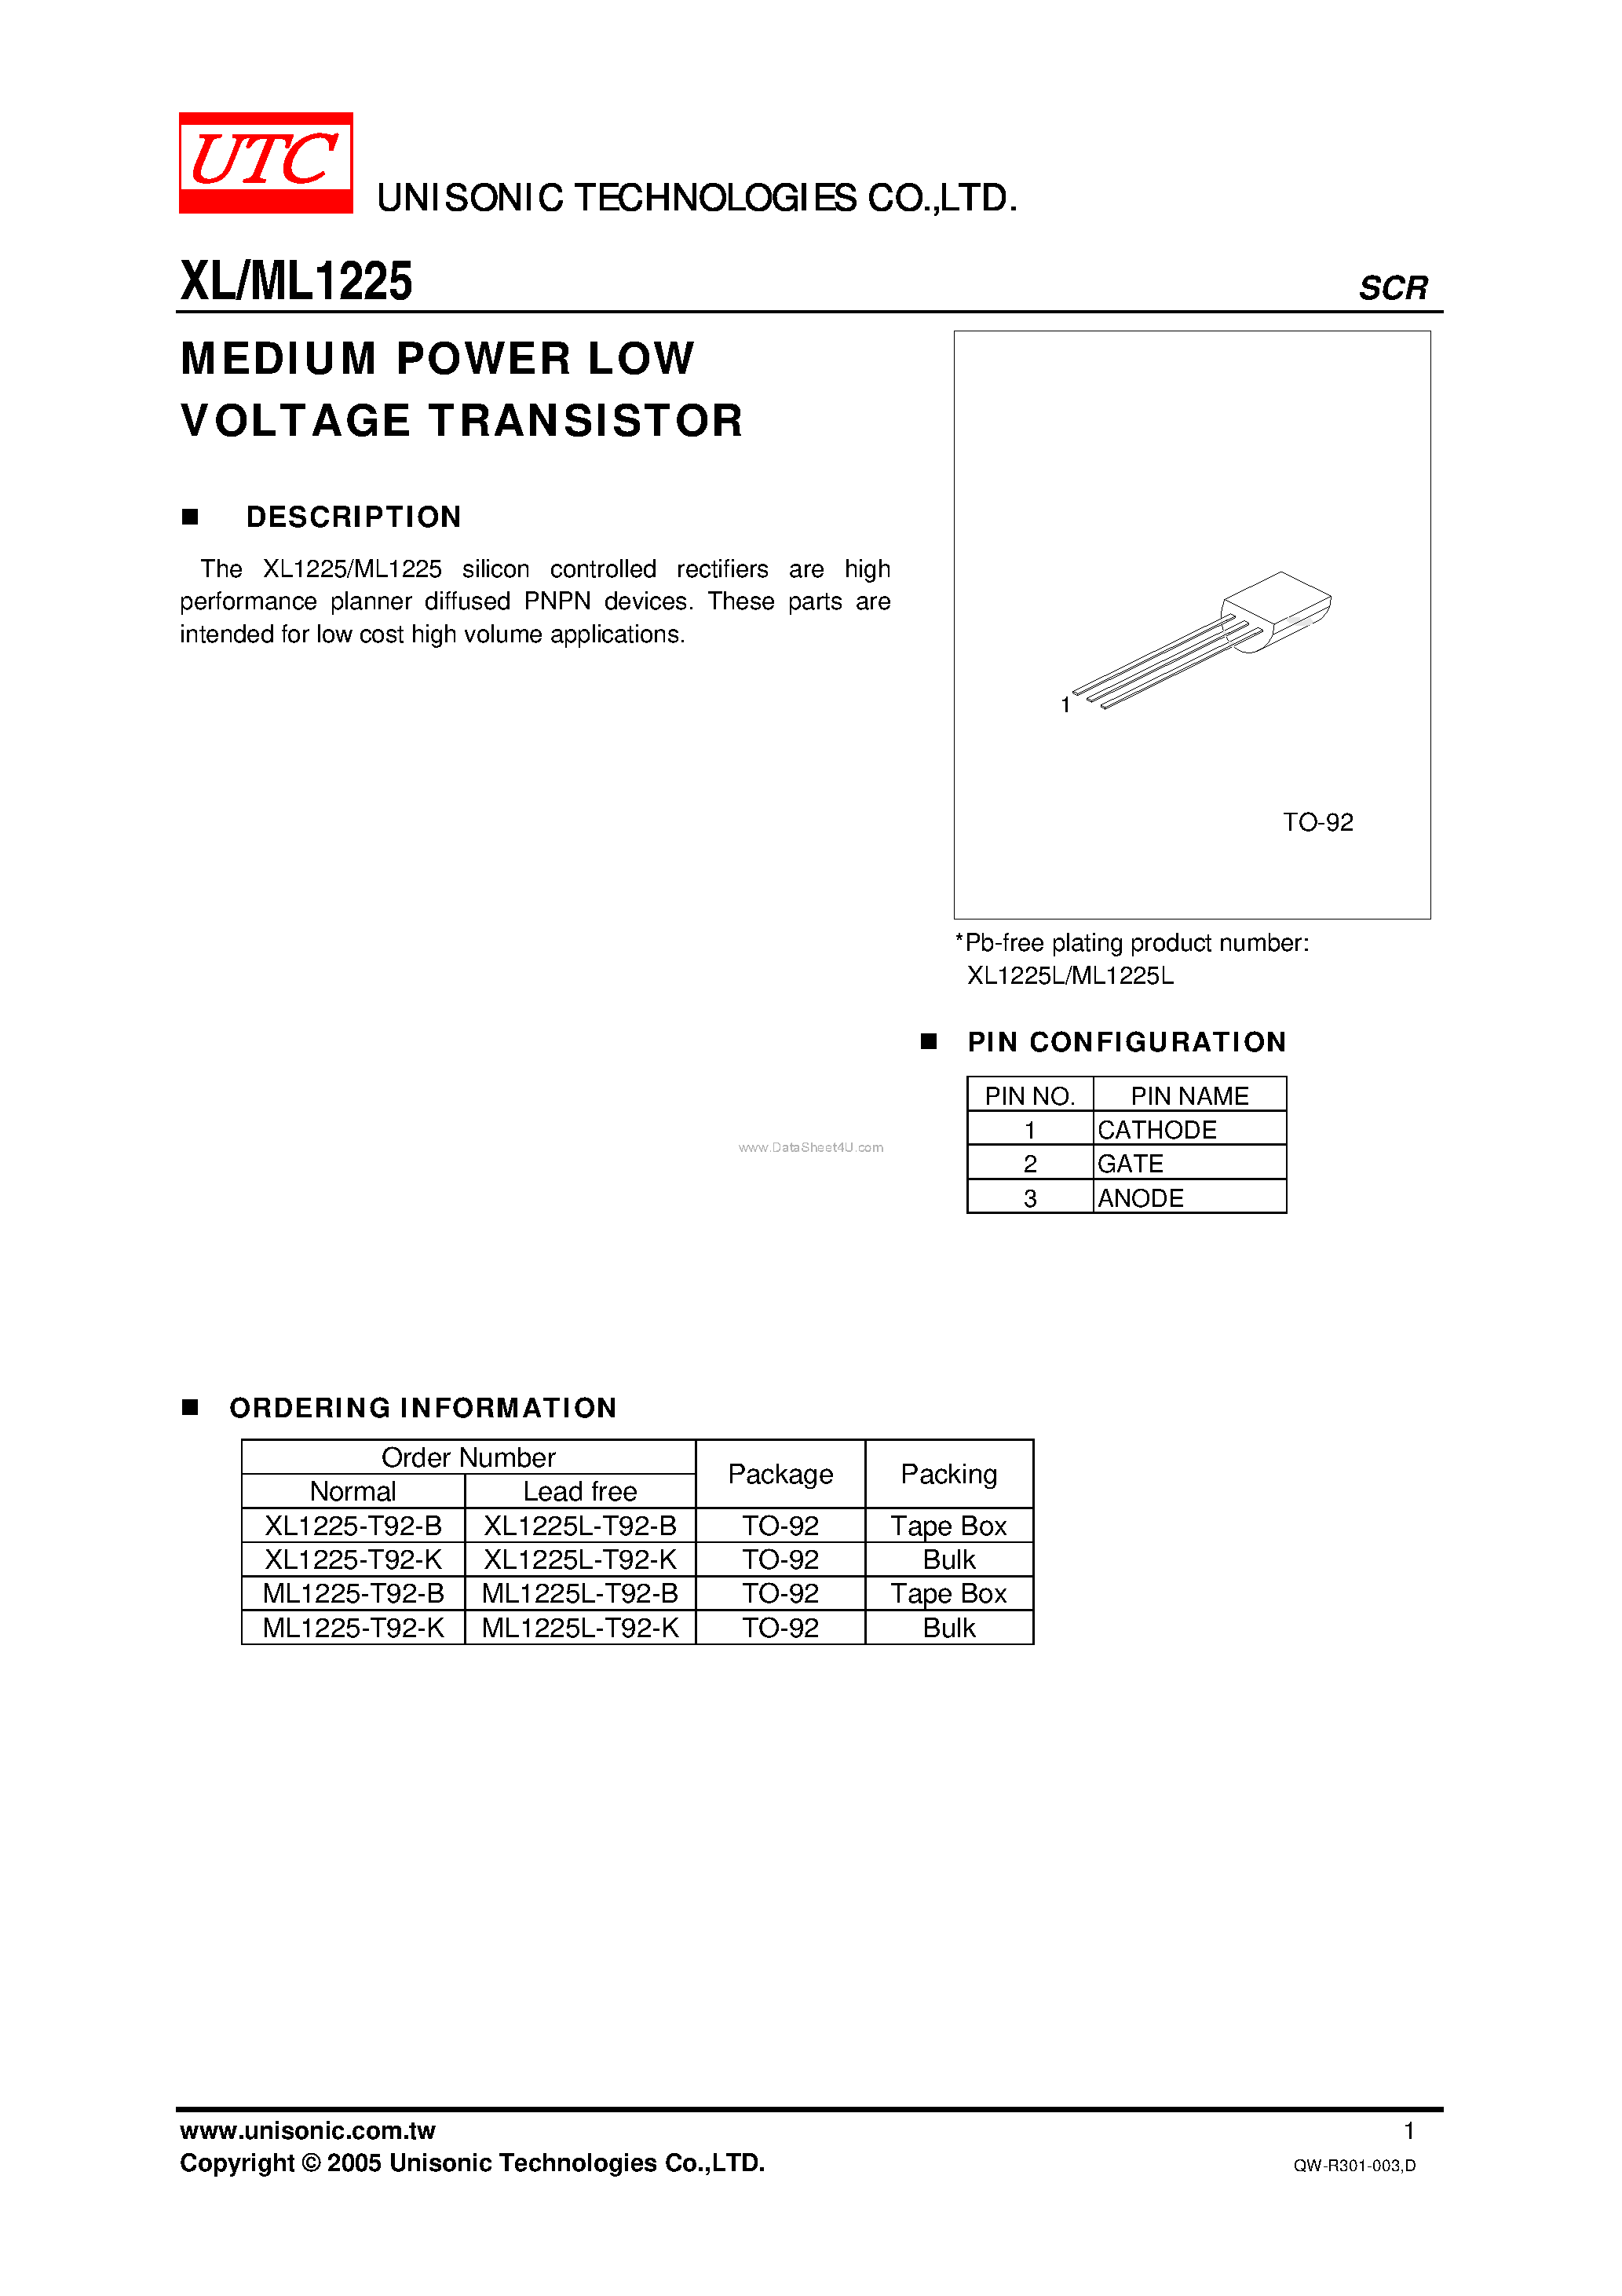 Datasheet ML1225 - The XL1225/ML1225 silicon controlled rectifiers page 1